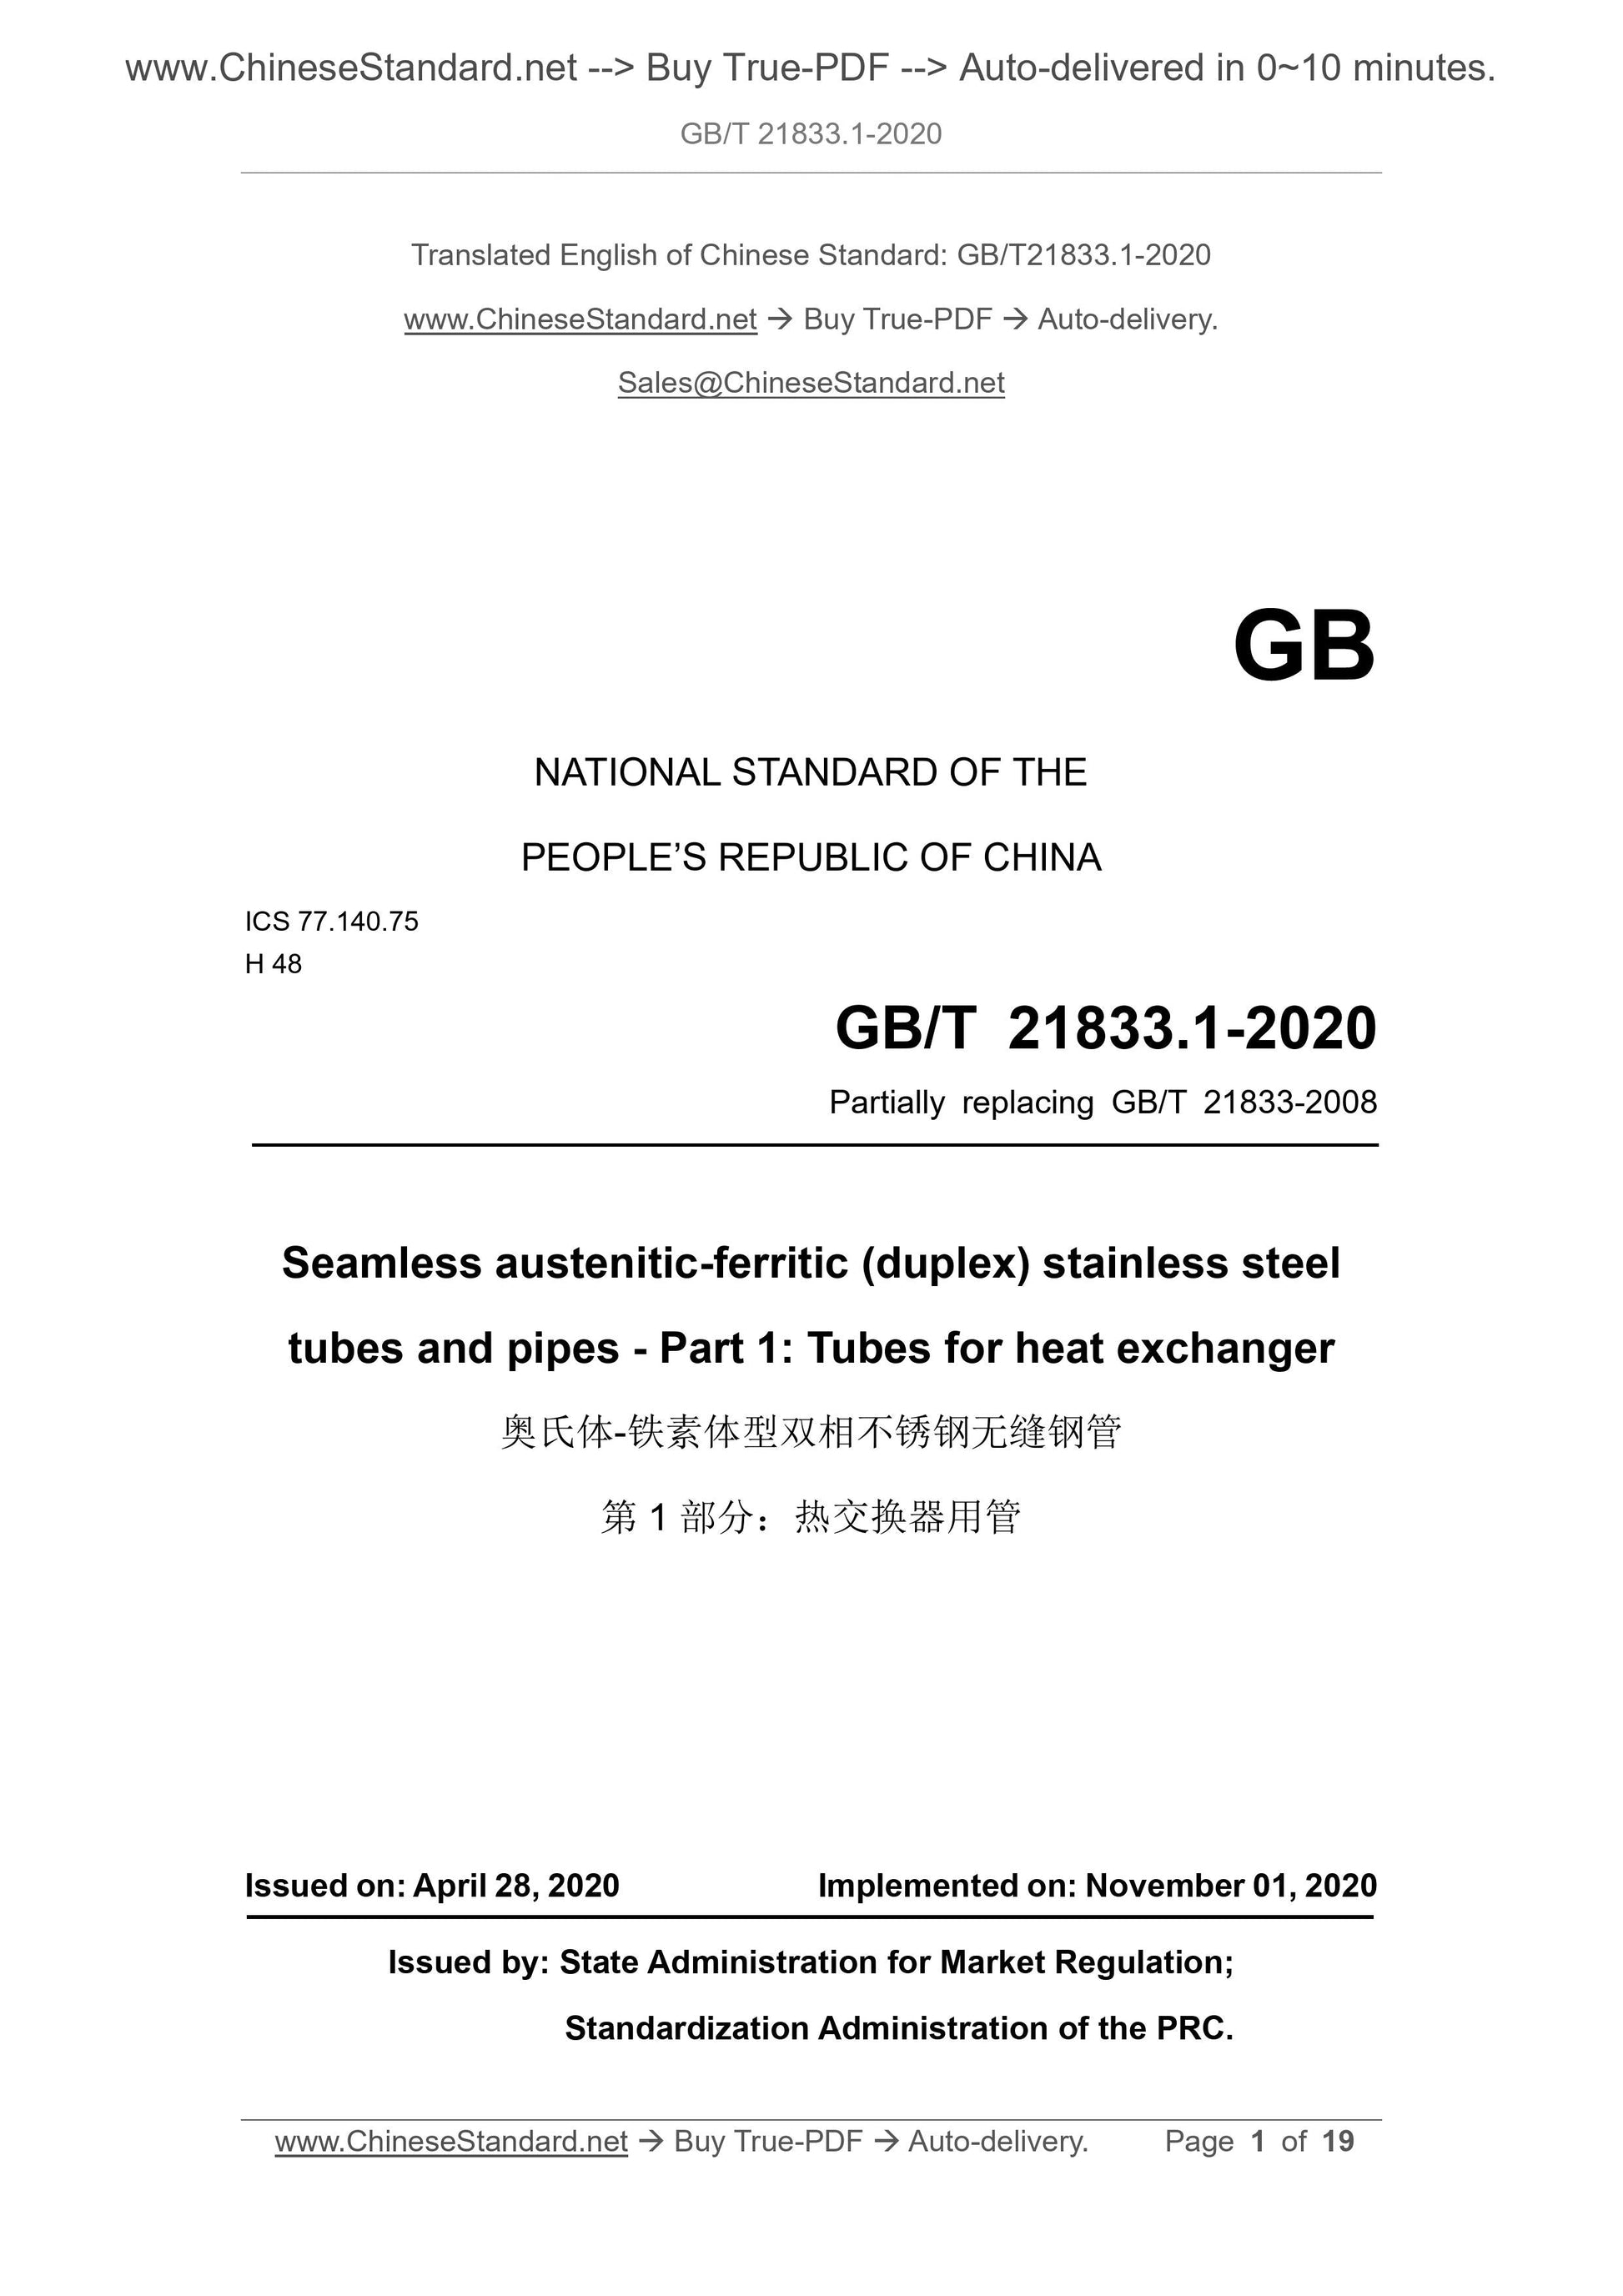 GB/T 21833.1-2020 Page 1